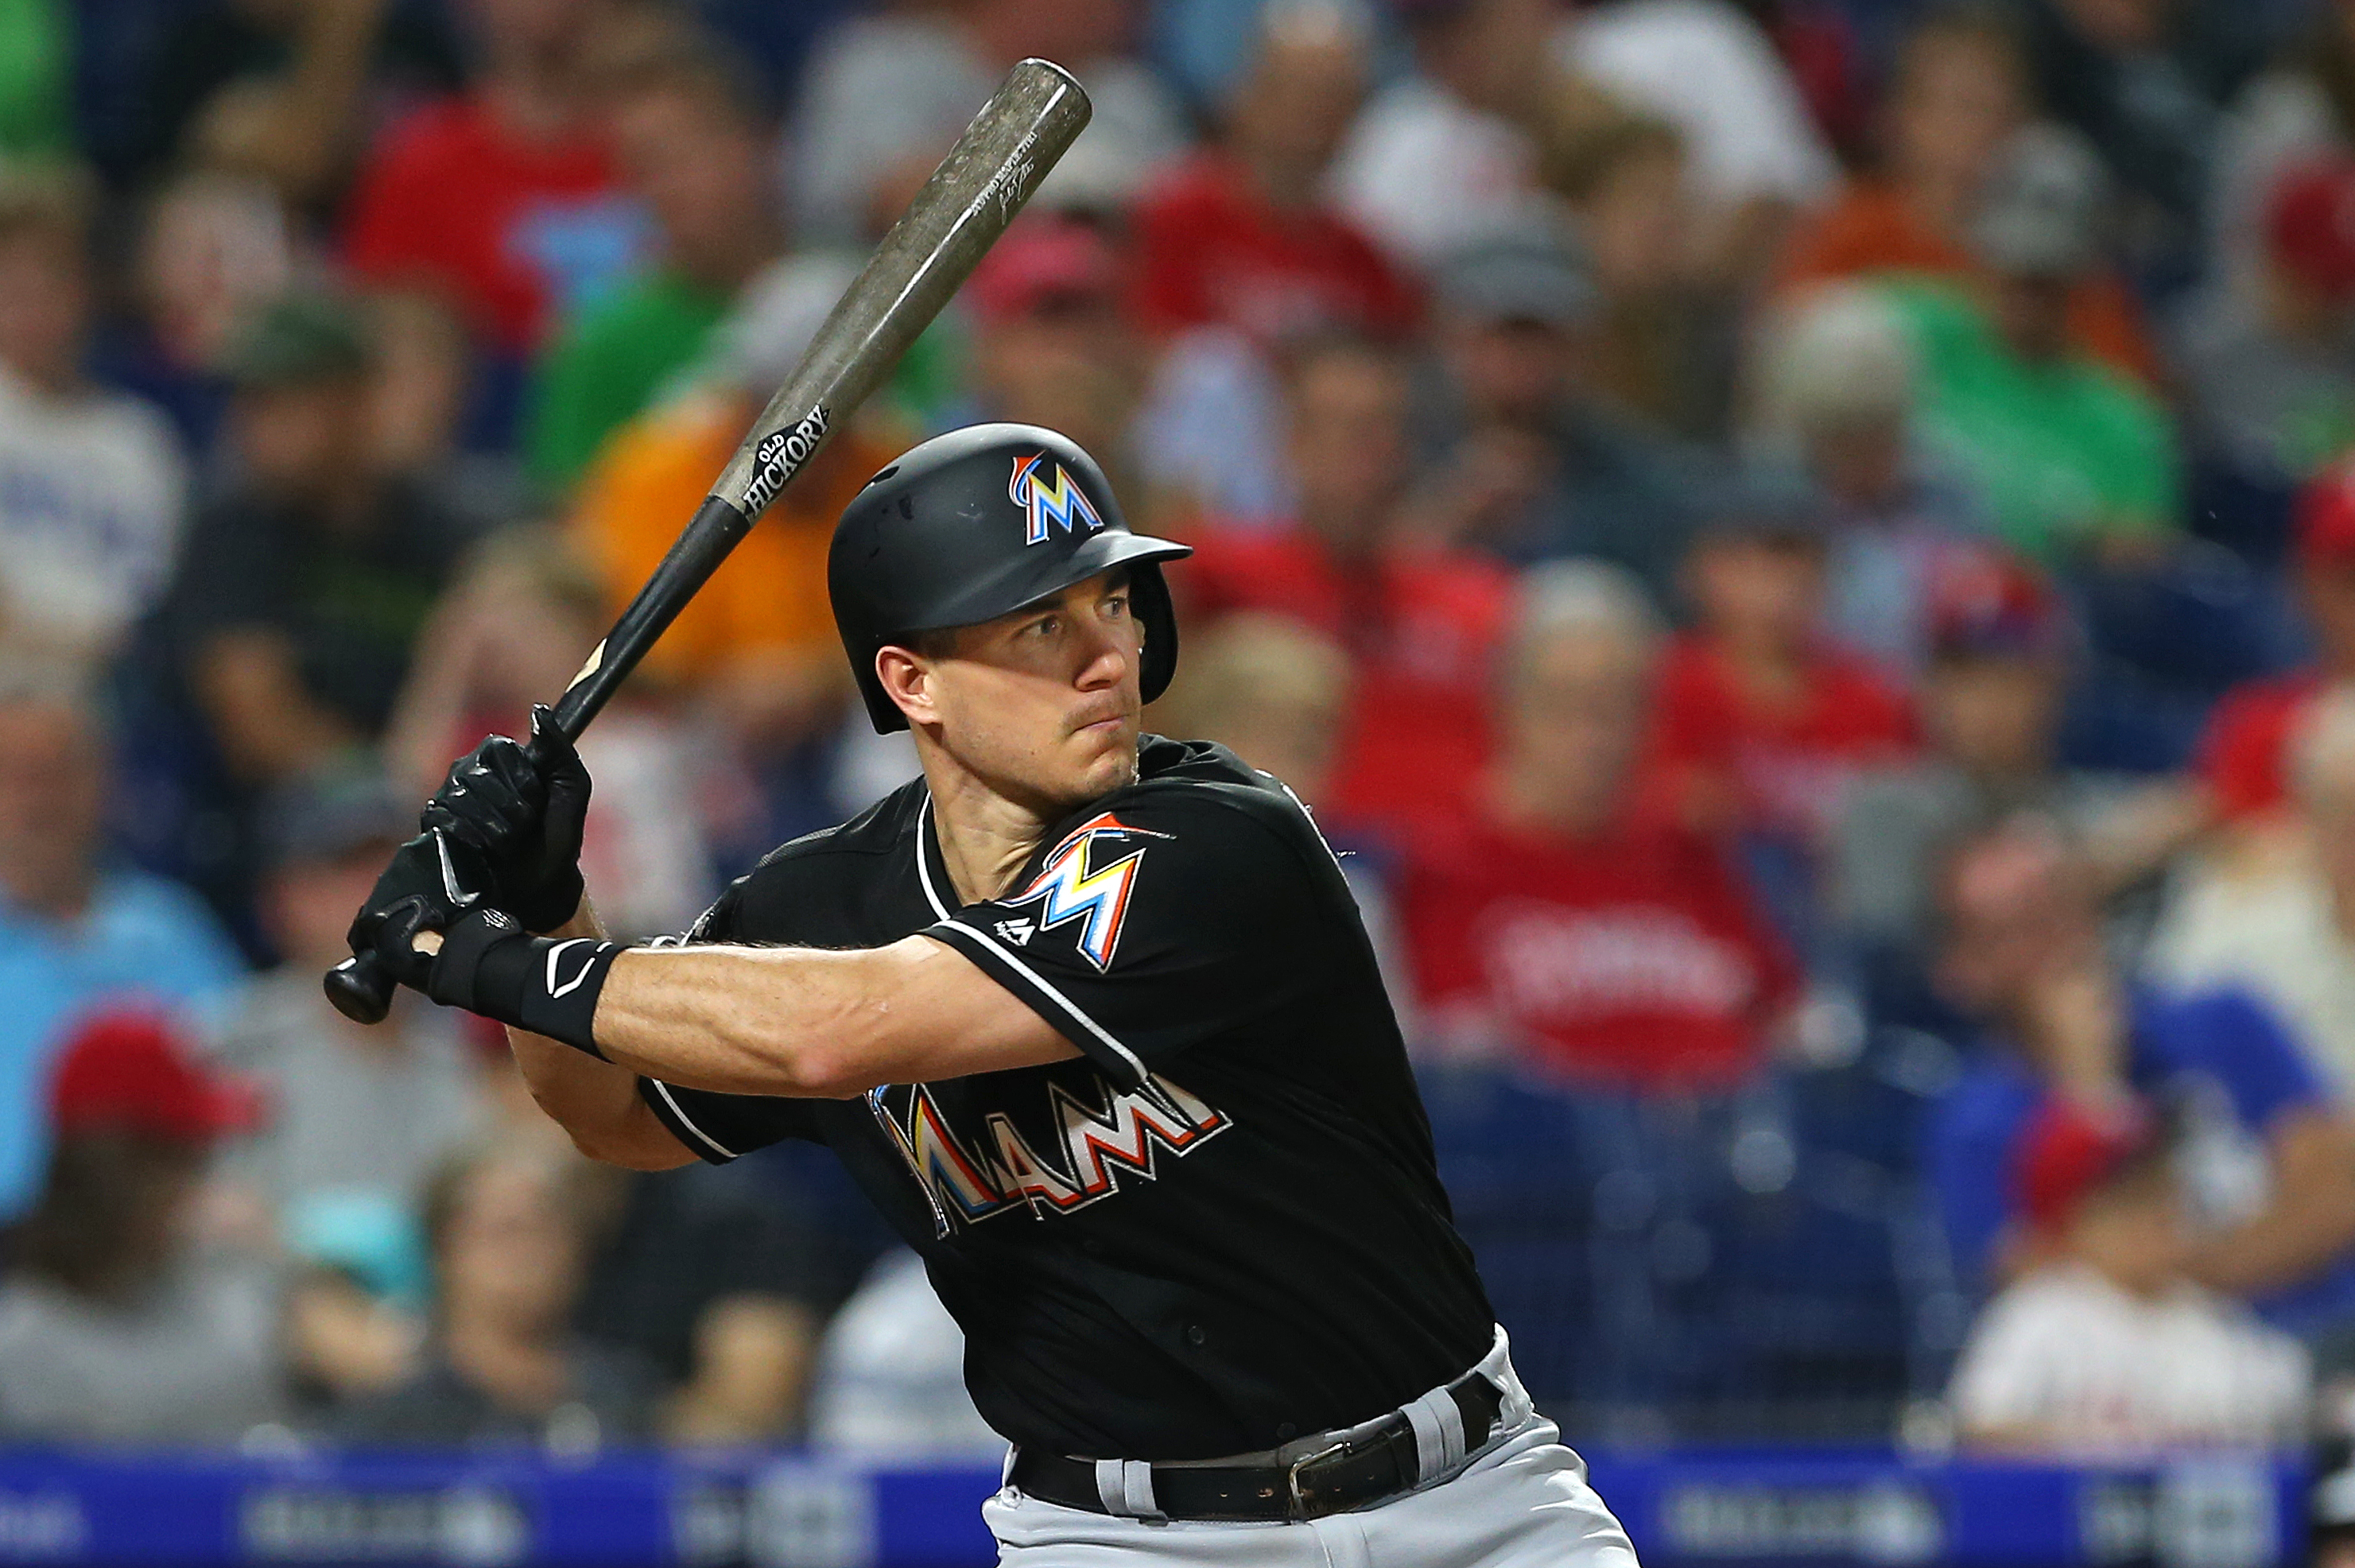 Marlins news: J.T. Realmuto gets 5 more years to haunt Fish with